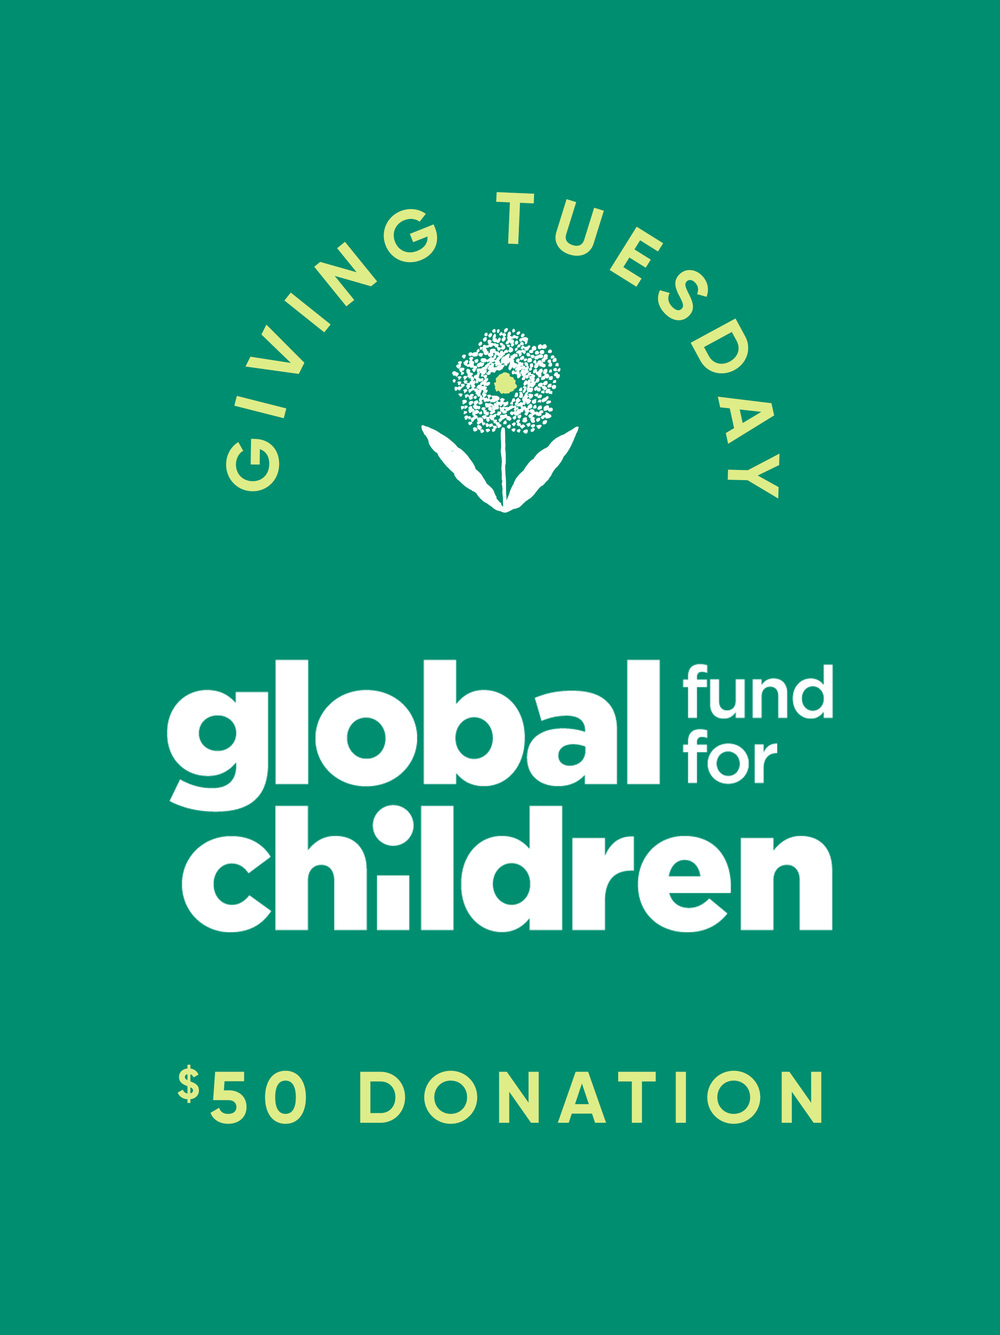 Donate $50 to Global Fund for Children